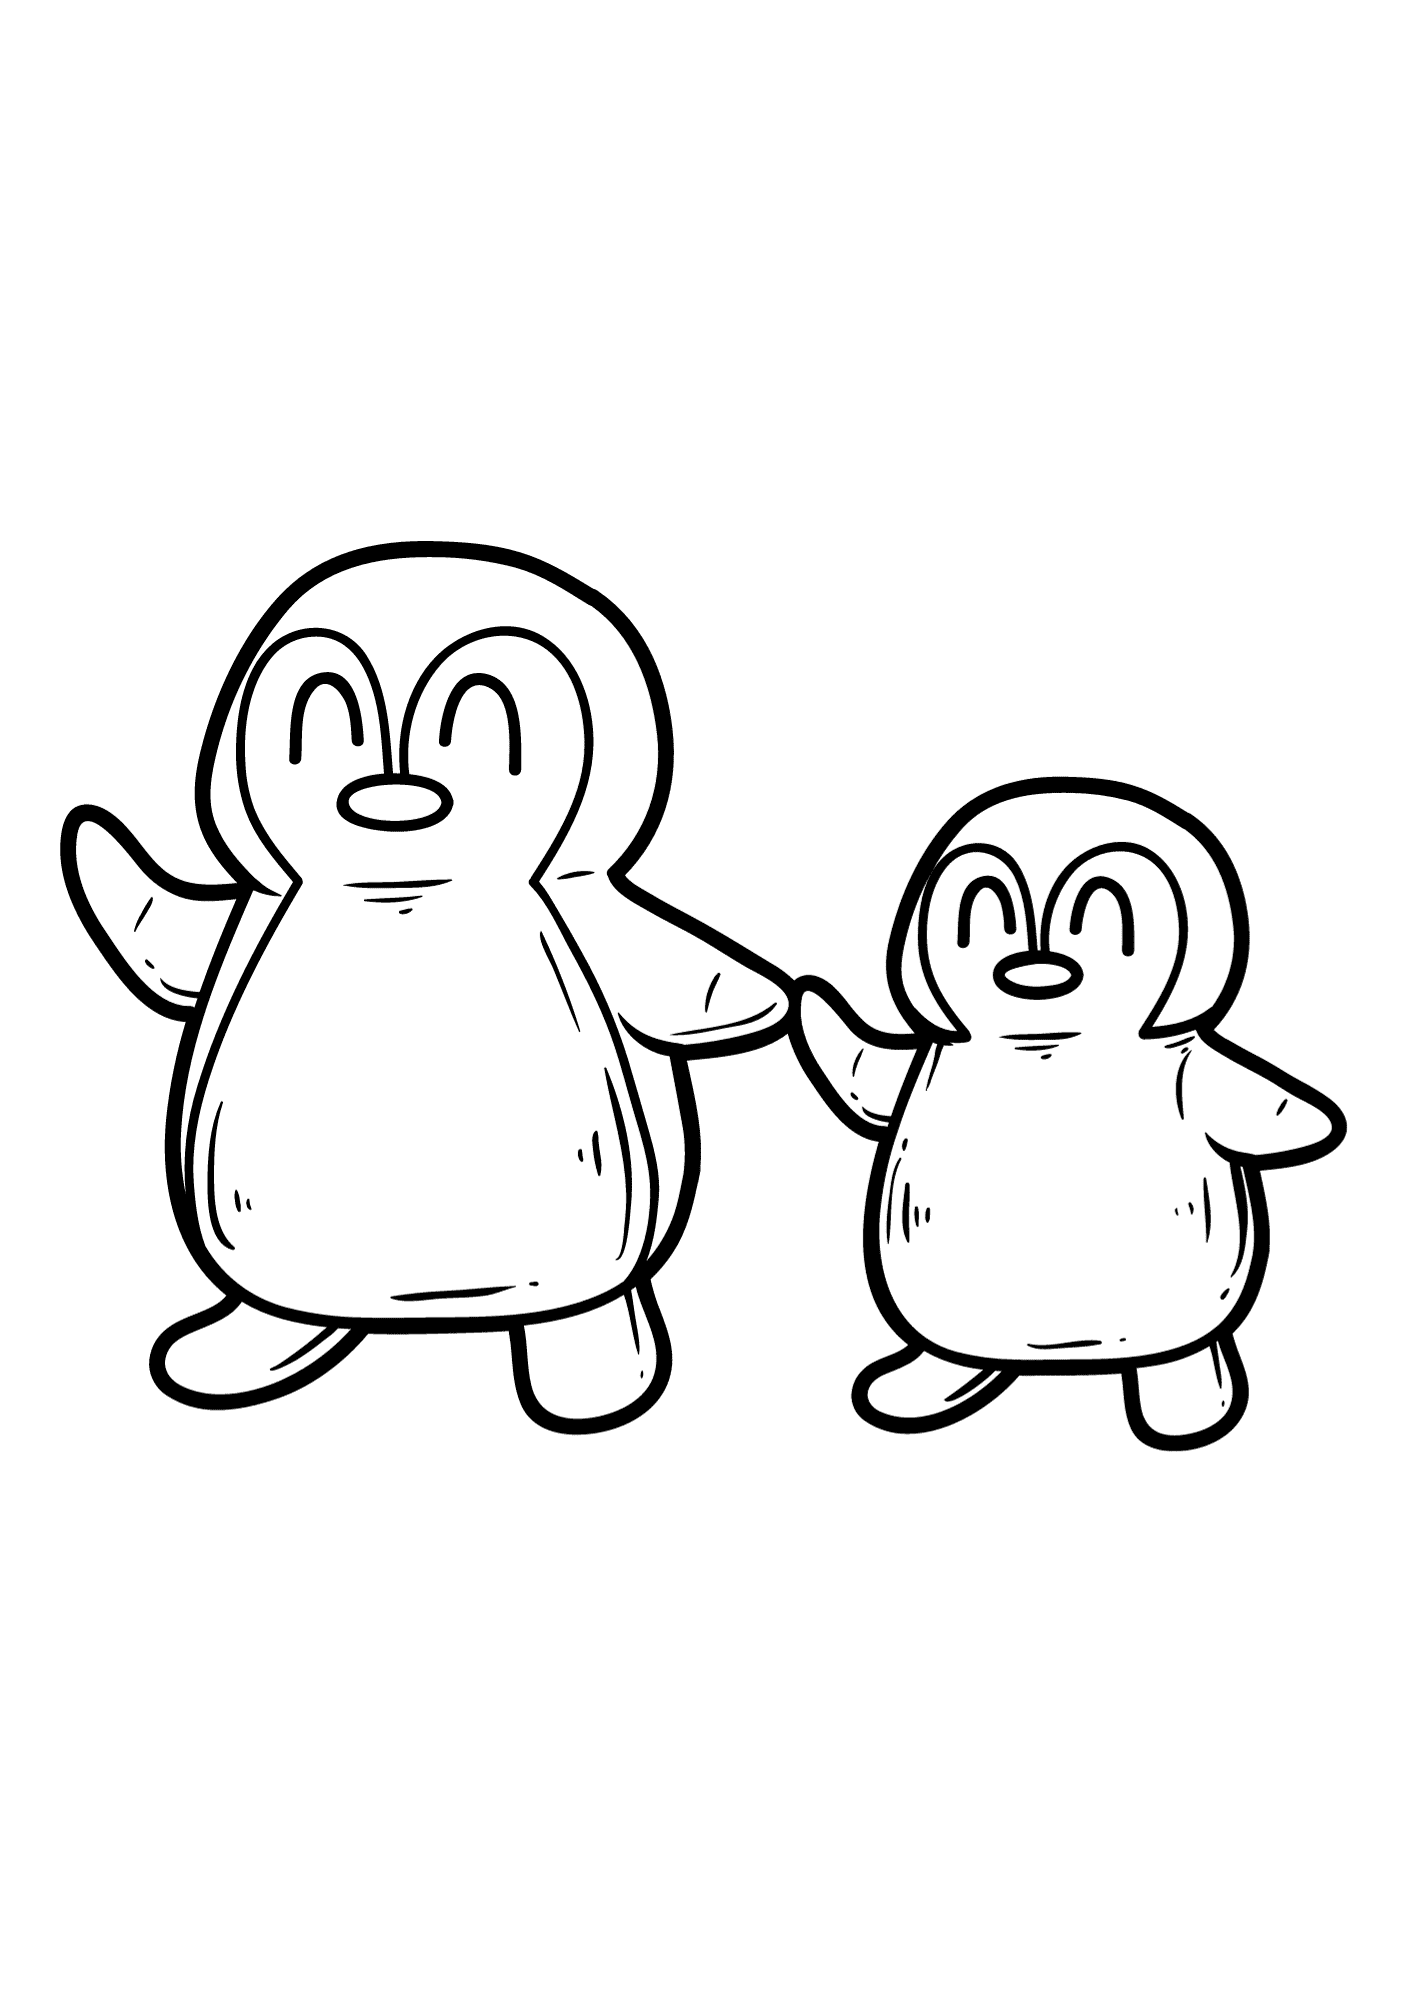 Penguin Father's Day Animal Outline Coloring Page